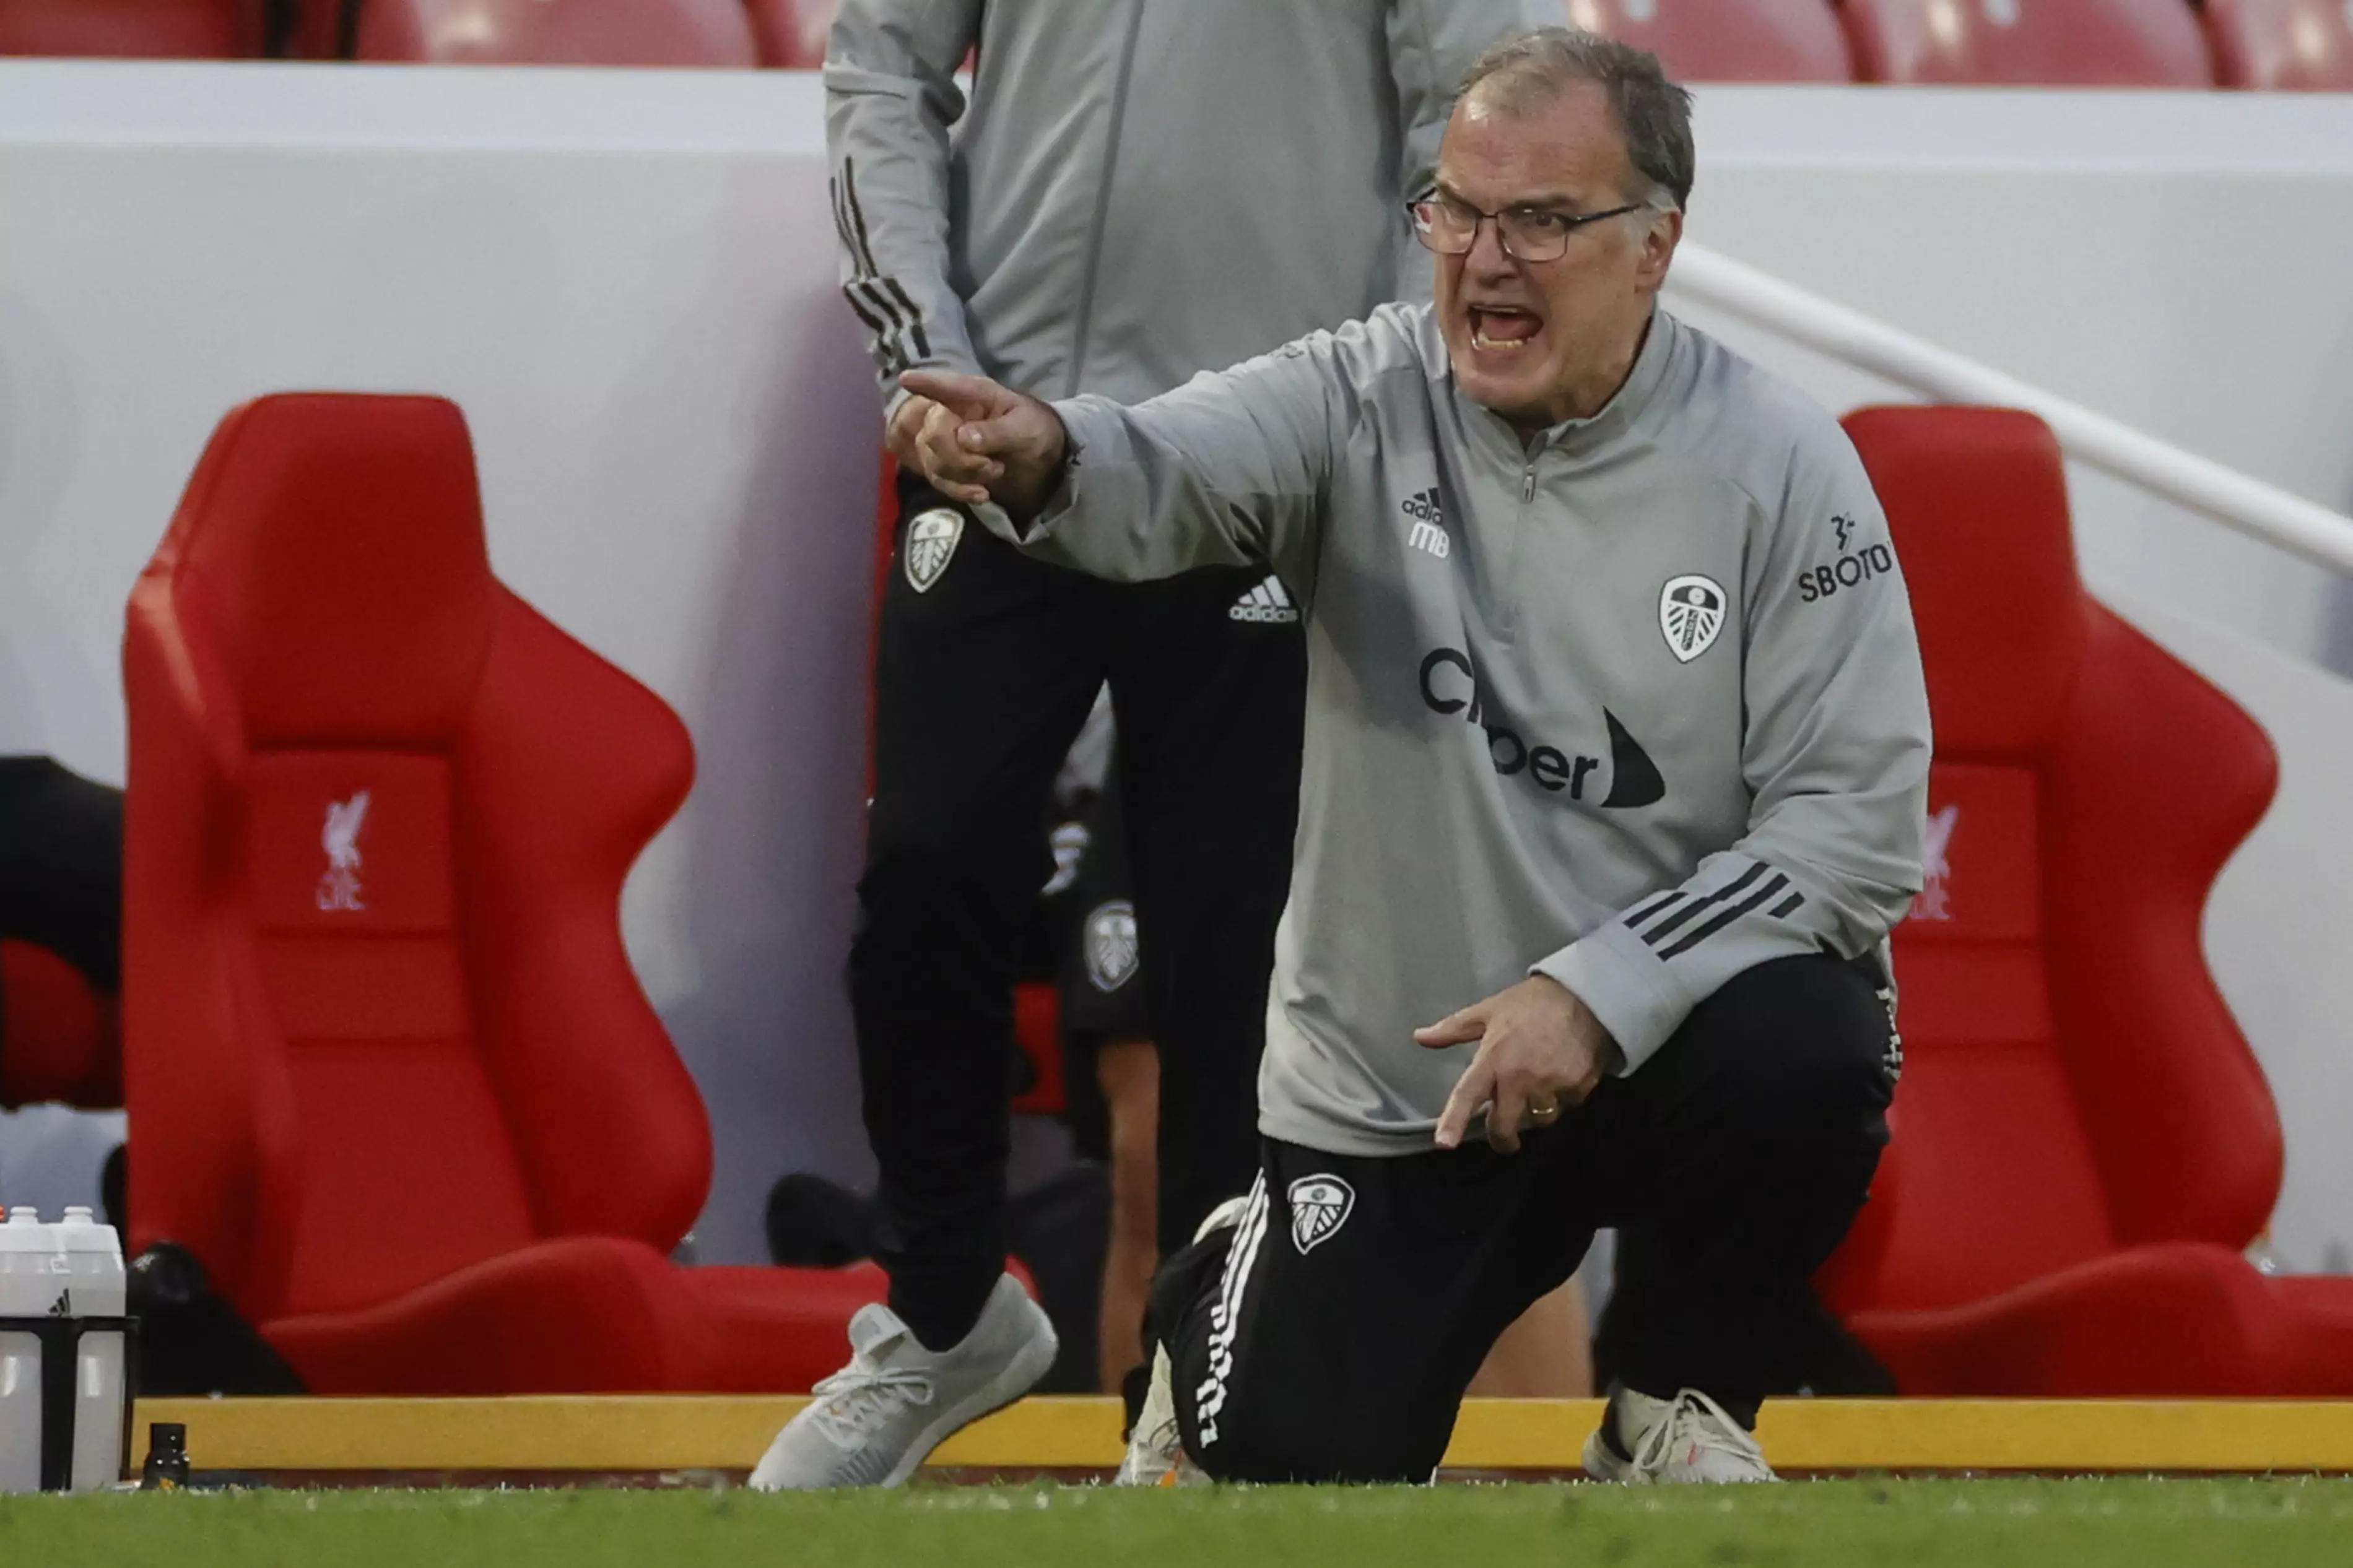 Bielsa down on his haunches during the Liverpool game. Image: PA Images